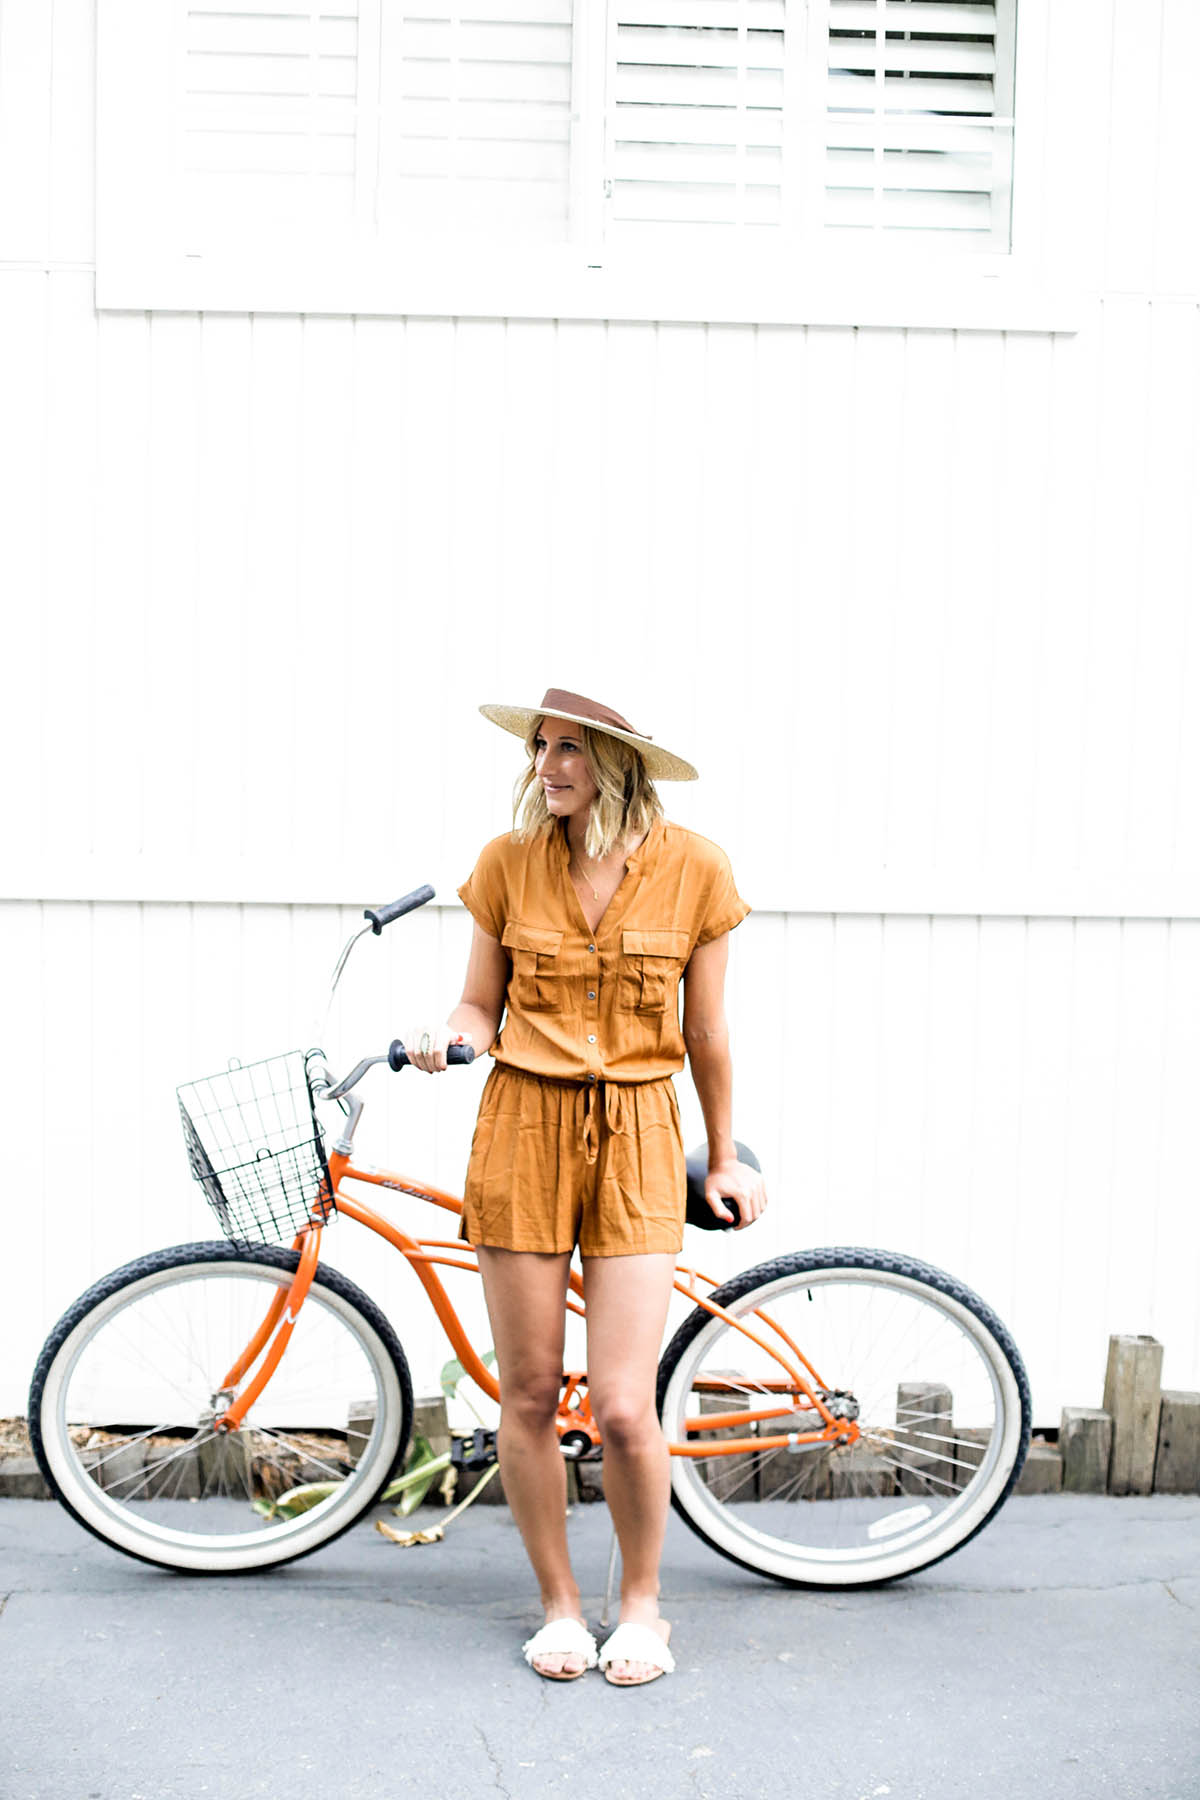 Amanda Holstein in Old Navy romper and woven fedora hat